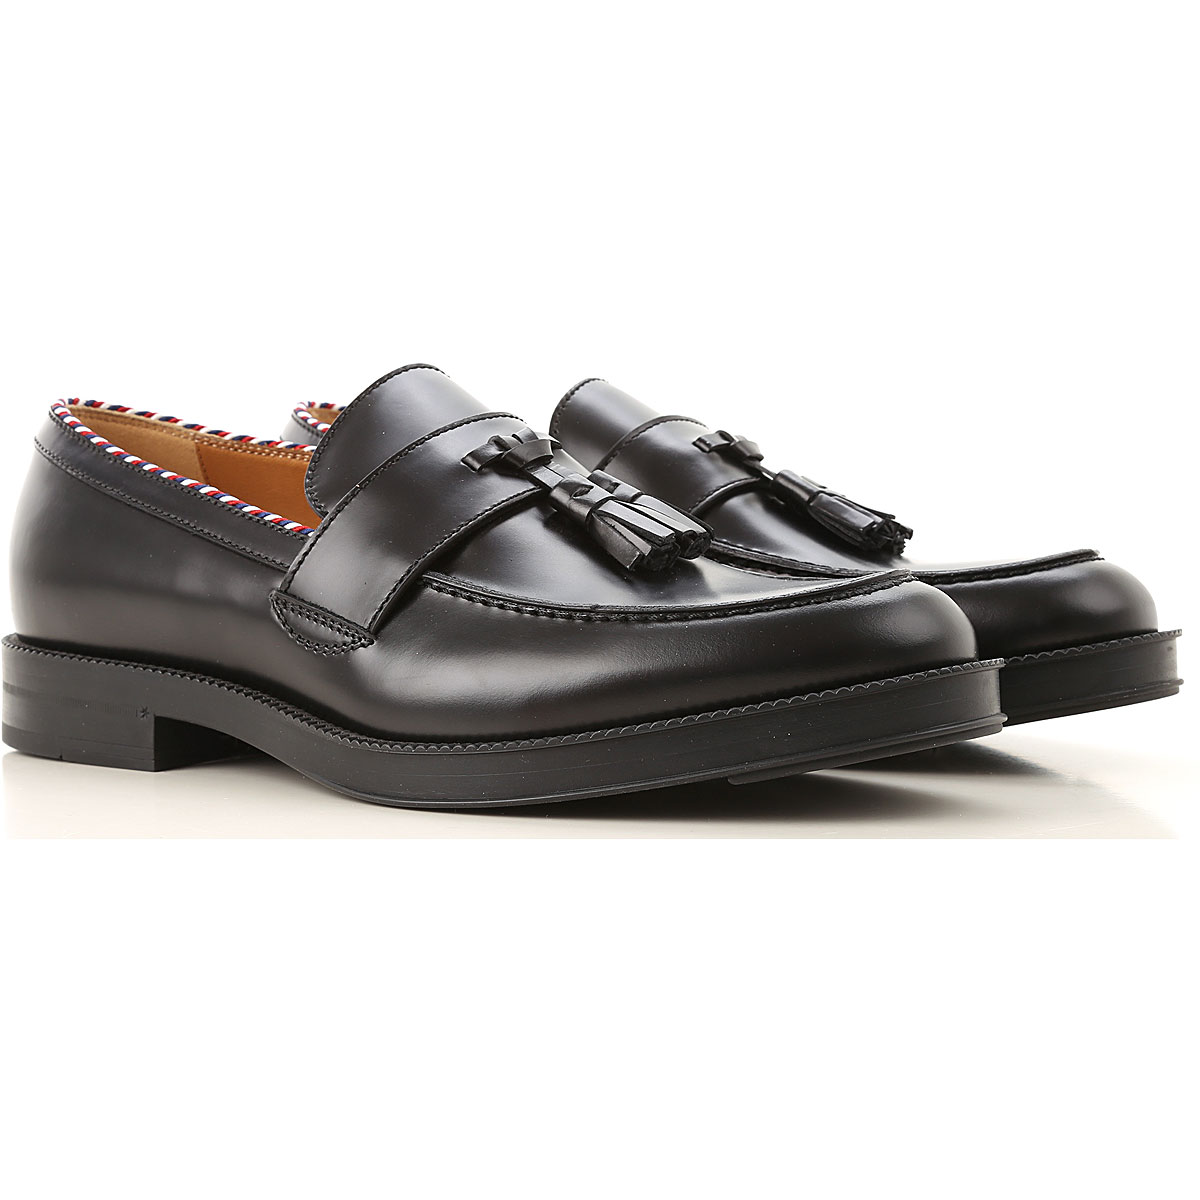 Mens Shoes Gucci, Style code: 523273-azm60-1072